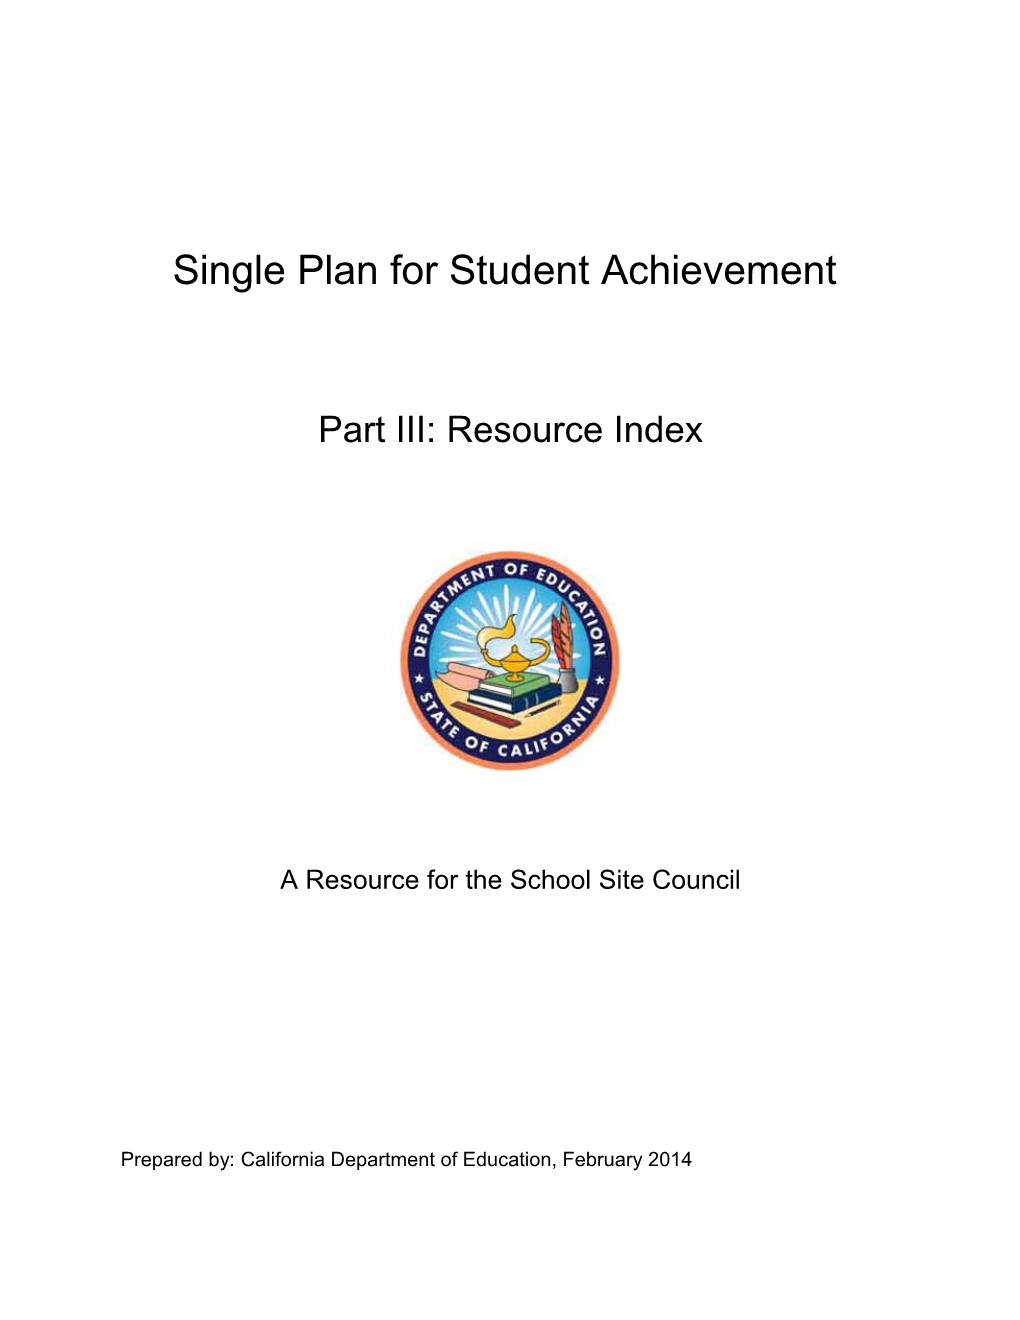 Single Plan for Student Achievement-Part III - Local Educational Agency Plan (CA Dept Of